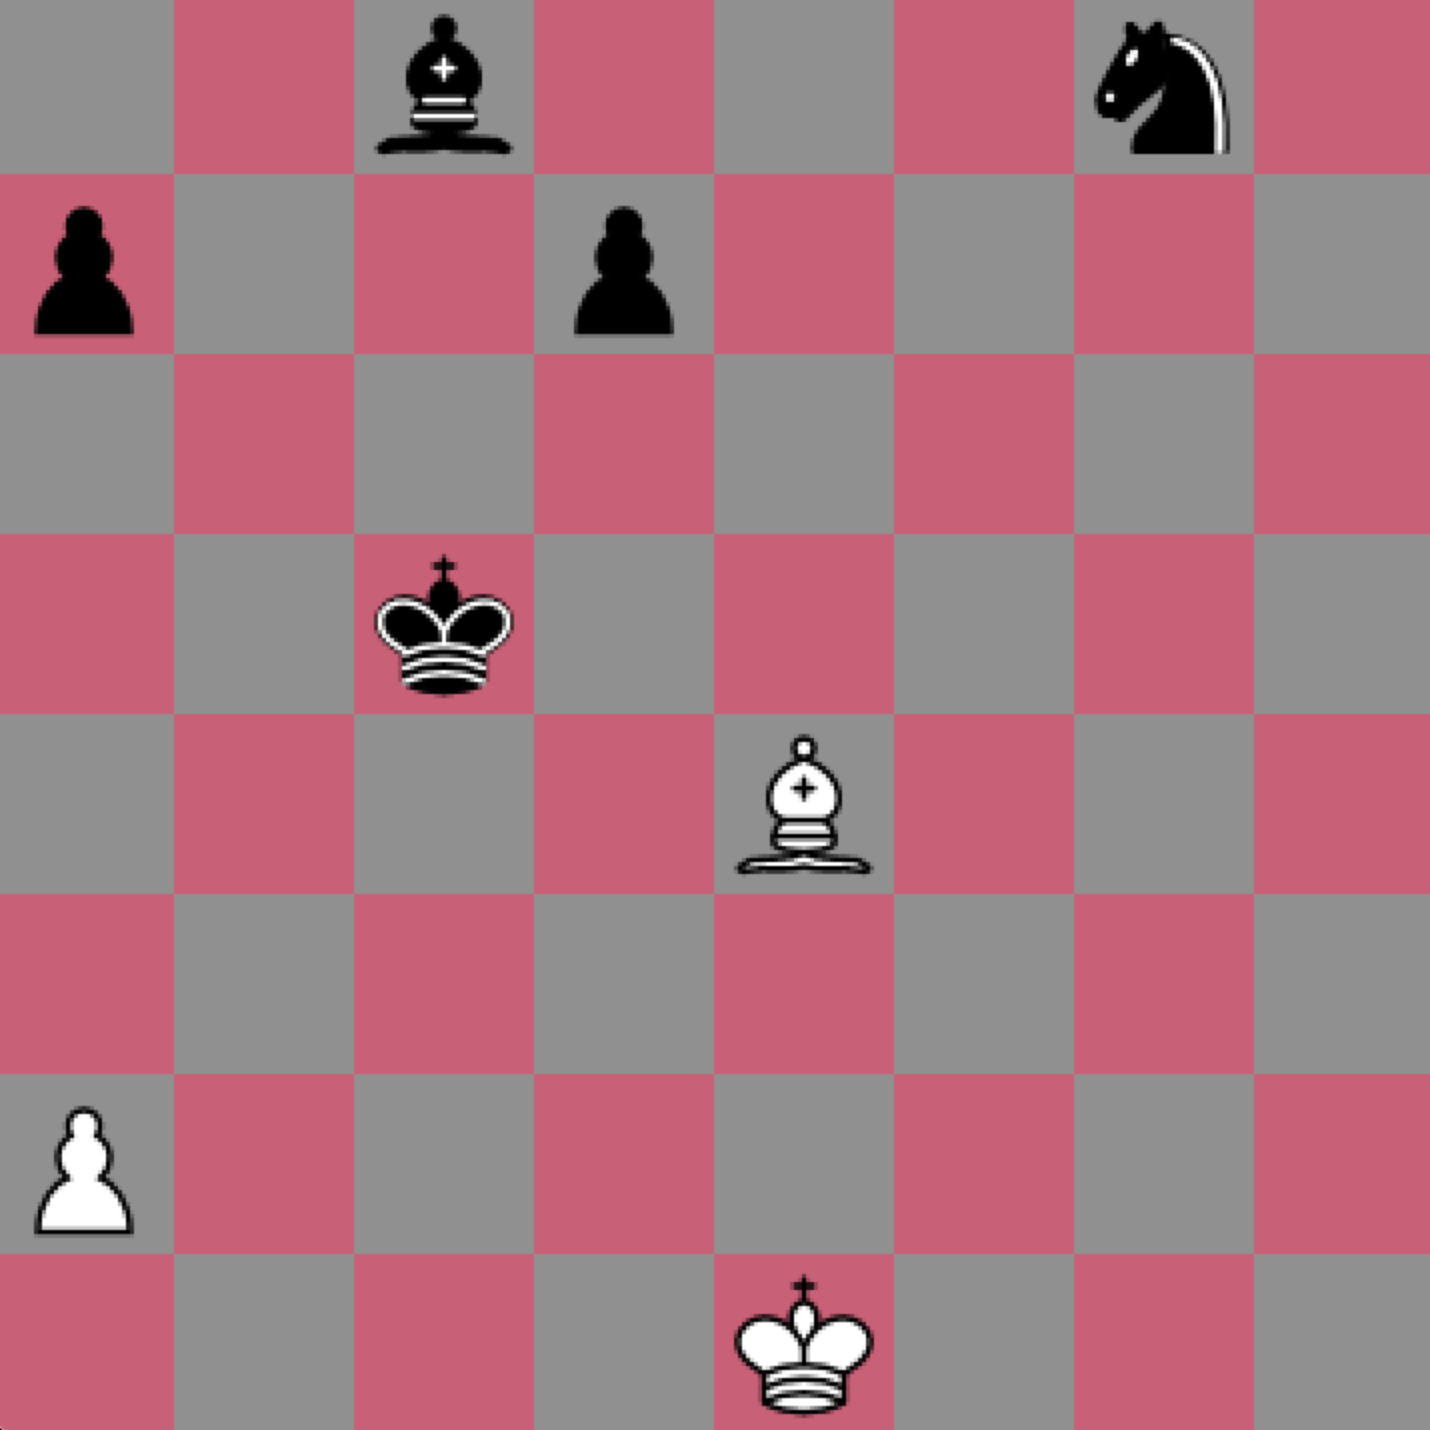 Moving Chessboard Pieces with Pygame –